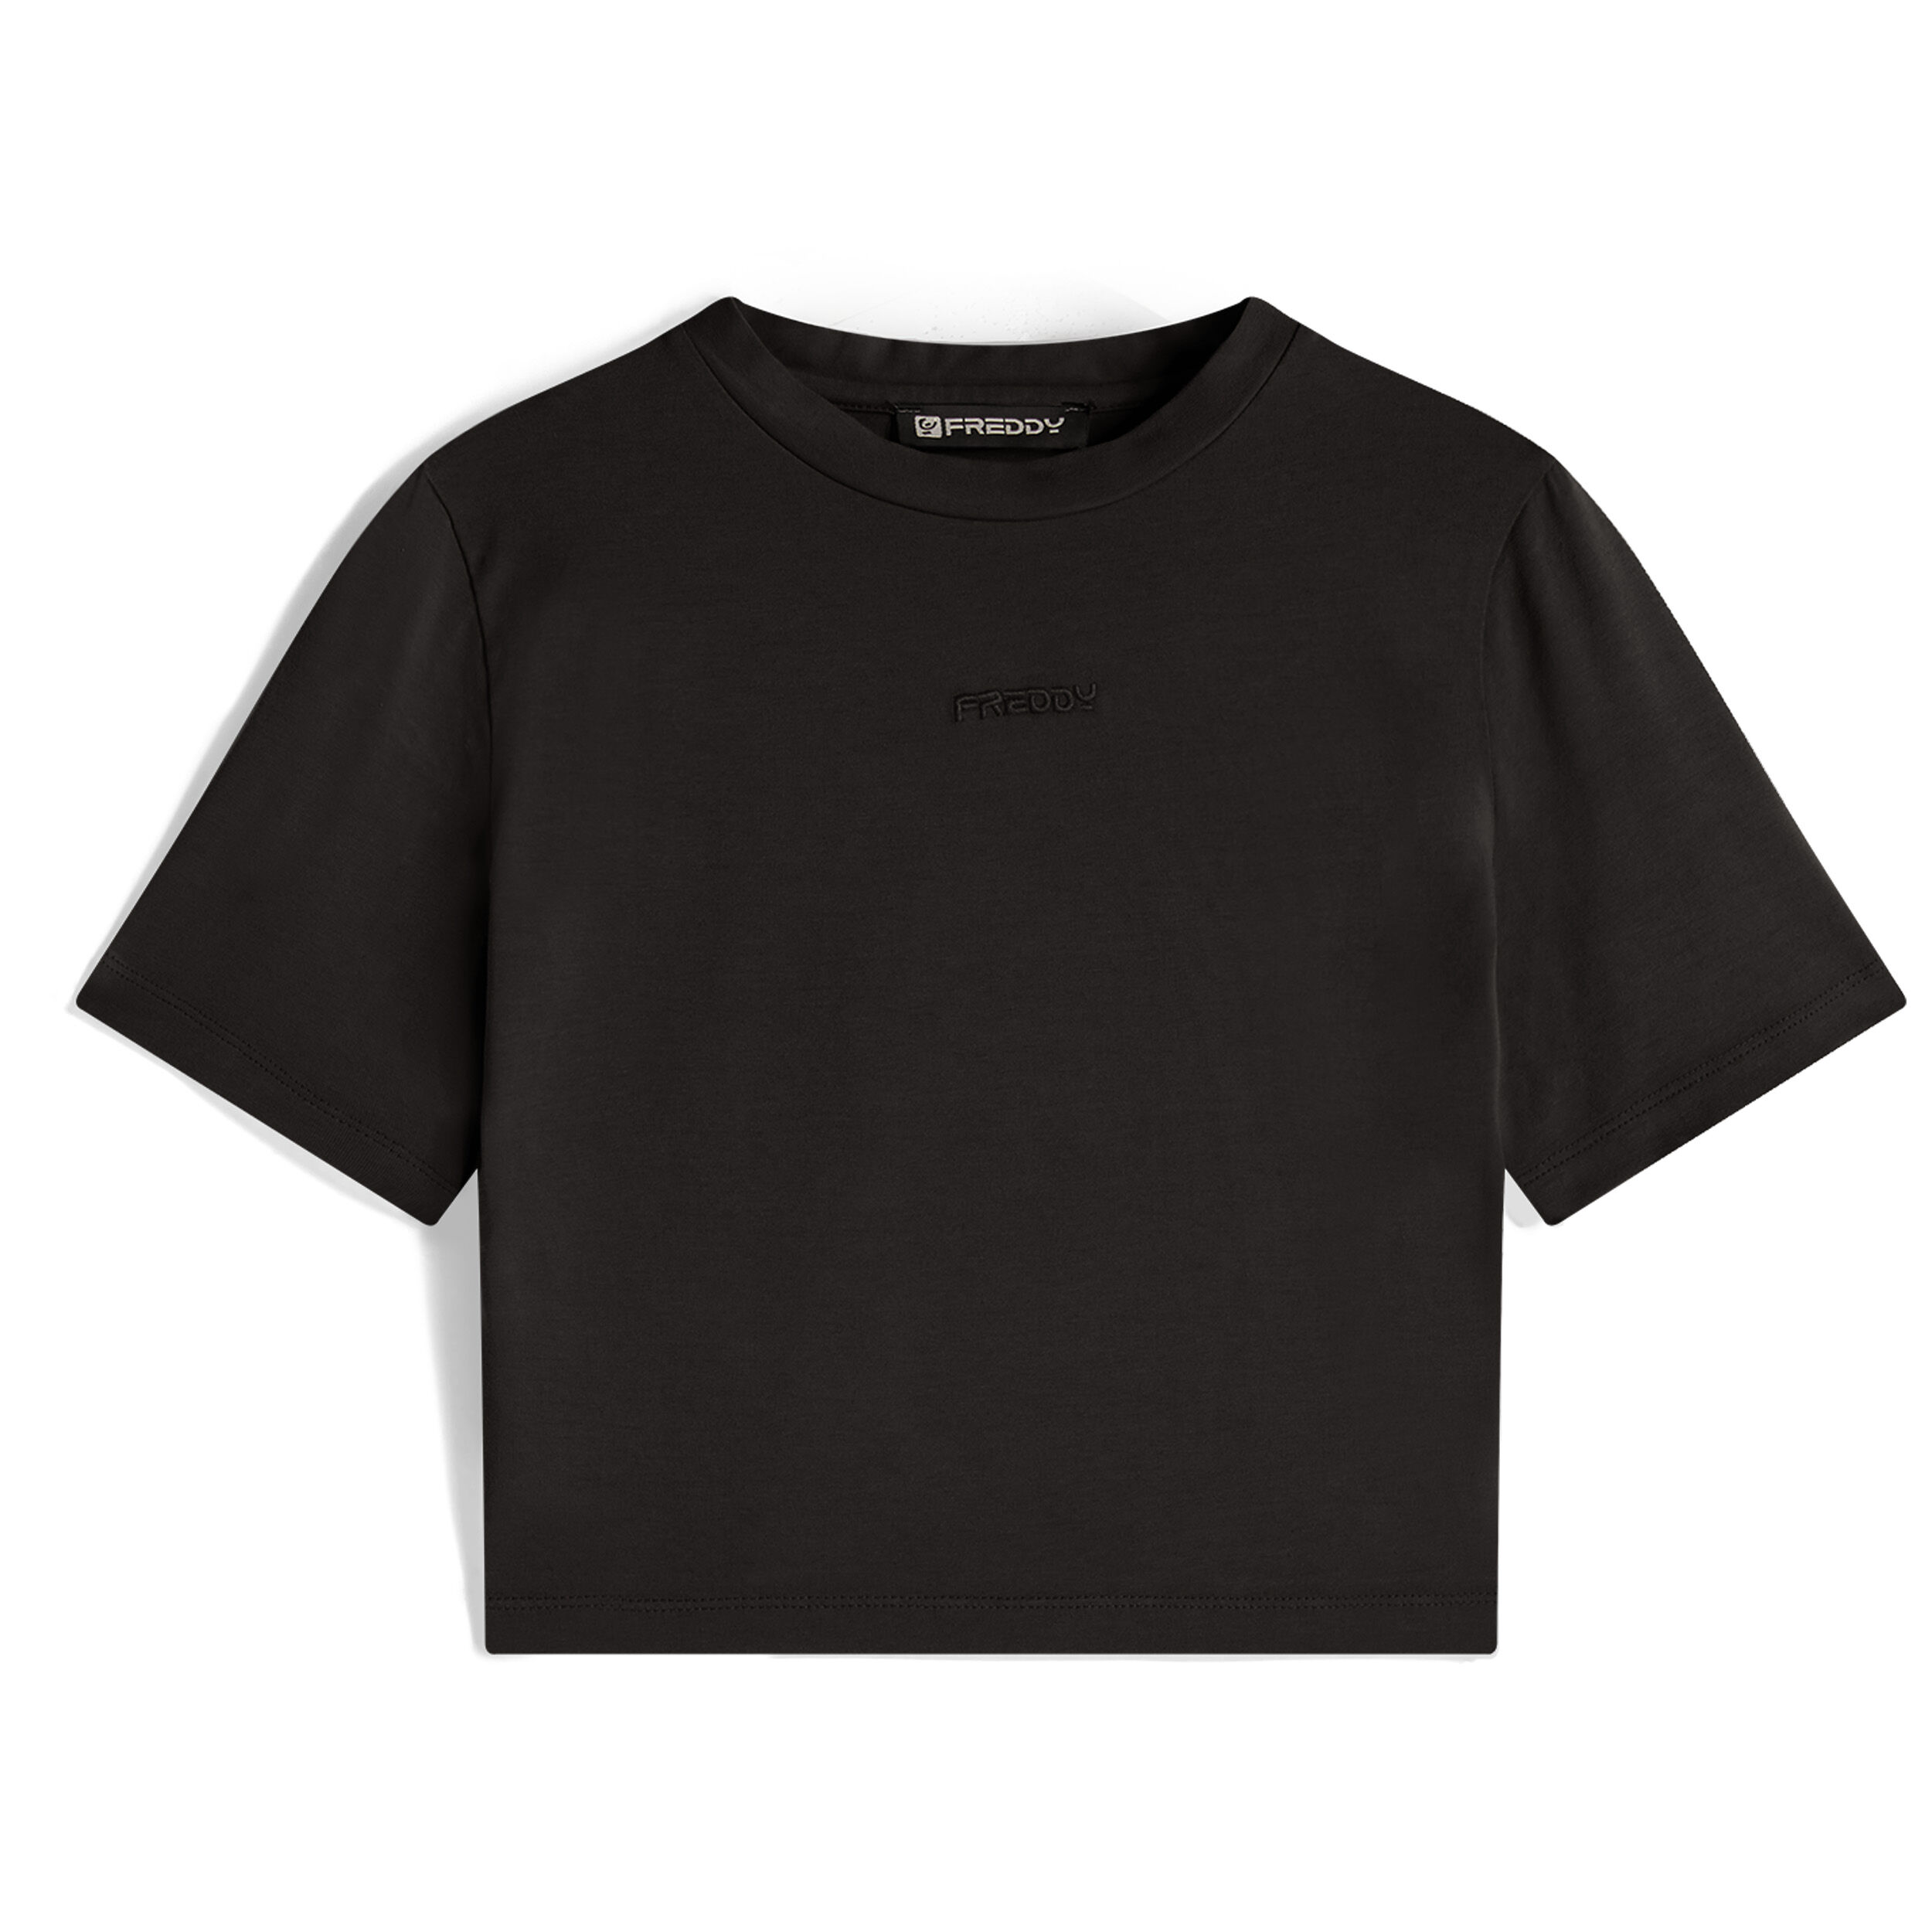 Freddy T-shirt slim fit corta in tessuto jersey tinto capo Black Direct Dyed Donna Small